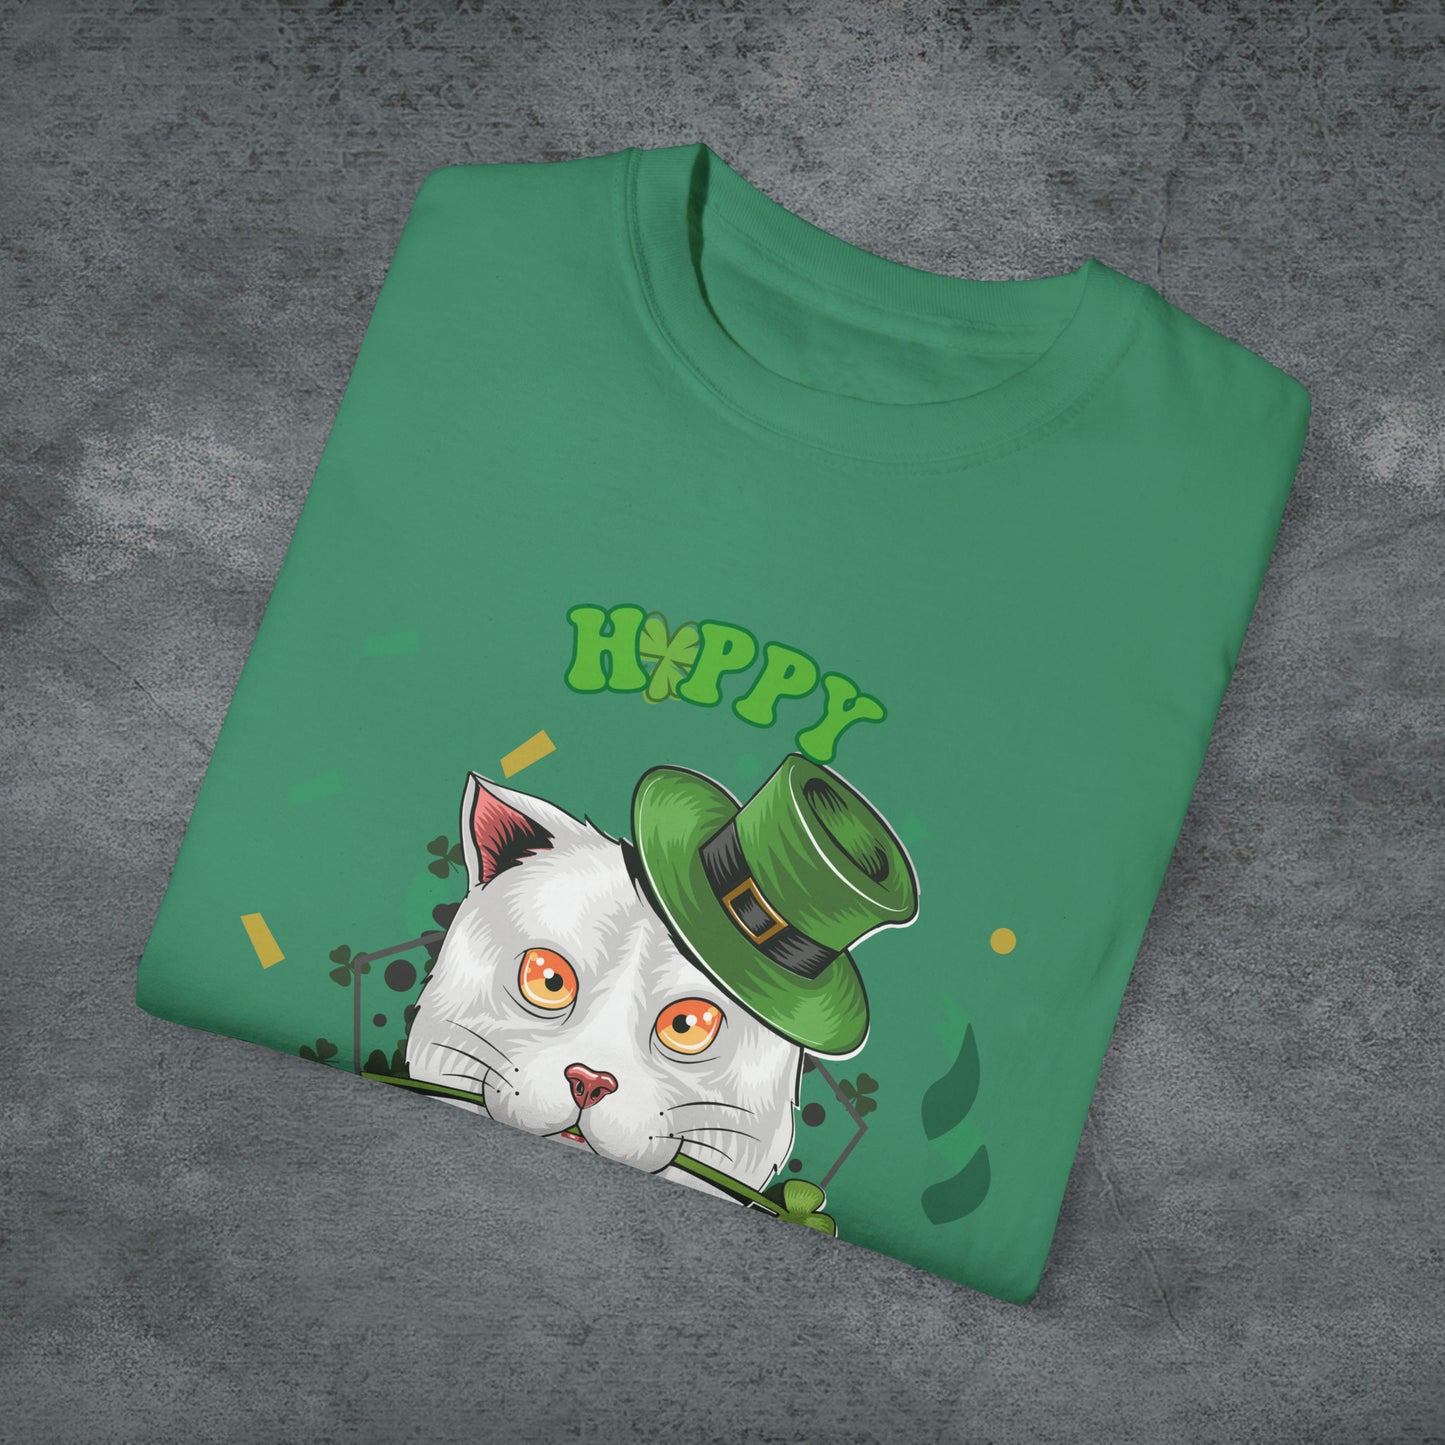 Happy St. Catty's Day Funny St. Patrick's Day Comfort Colors T-Shirt - St. Paddy's Day Shirt for Cat Lover St. Patty's Day Fun T-Shirt   